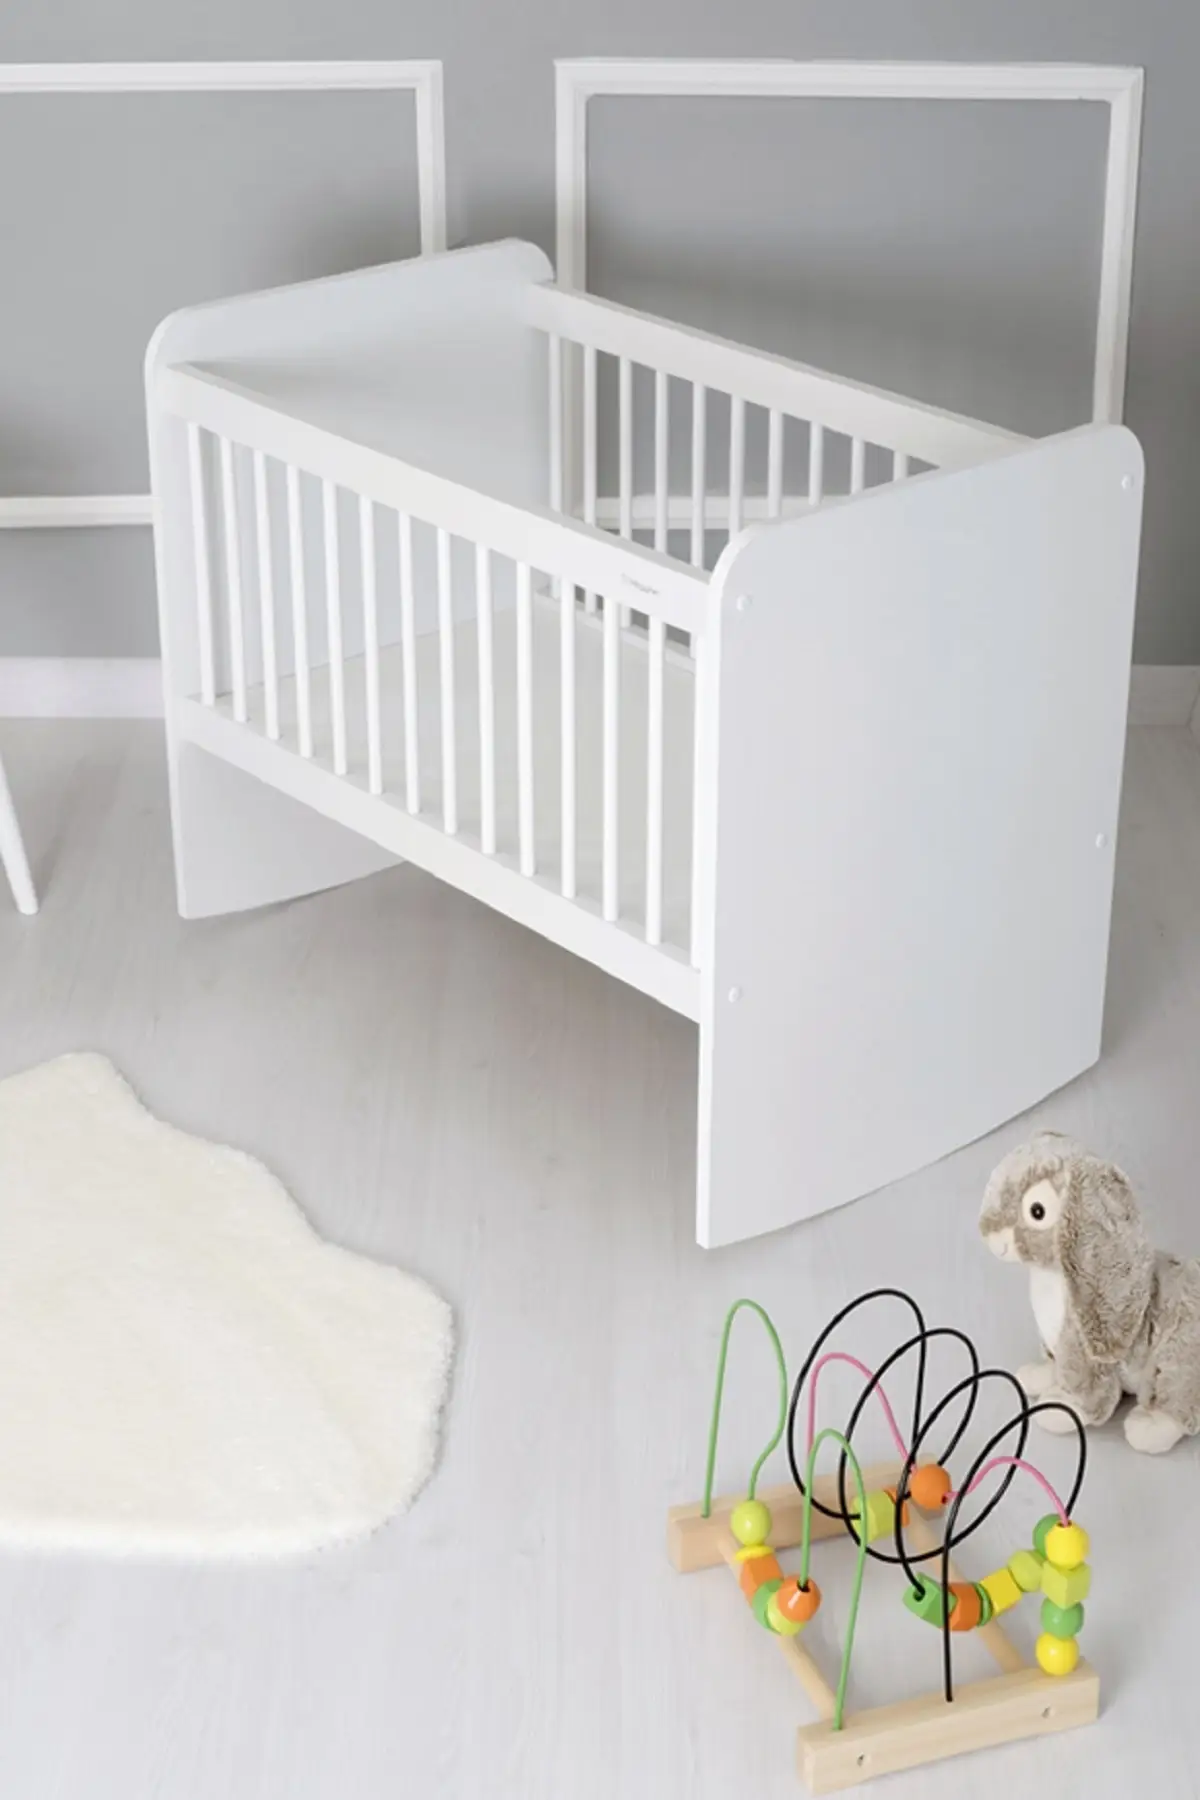 Rocking crib baby bed child bed Bw-1010 Dangle Fixed Practical Crib 50x90